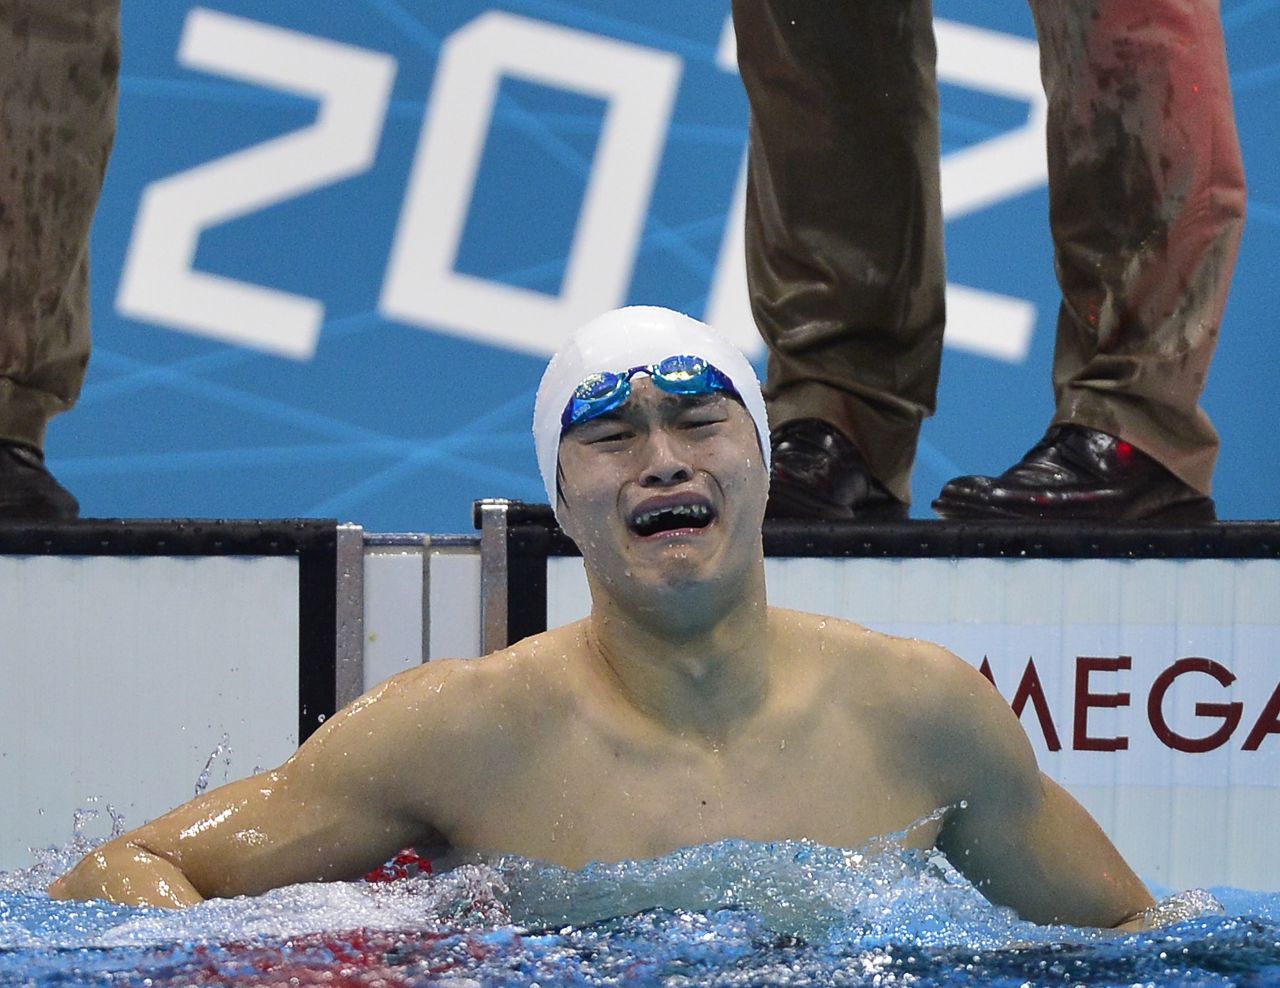 China's Sun Yang couldn't wait to get out of the pool to celebrate his gold medal win in the men's 1,500-meter freestyle.